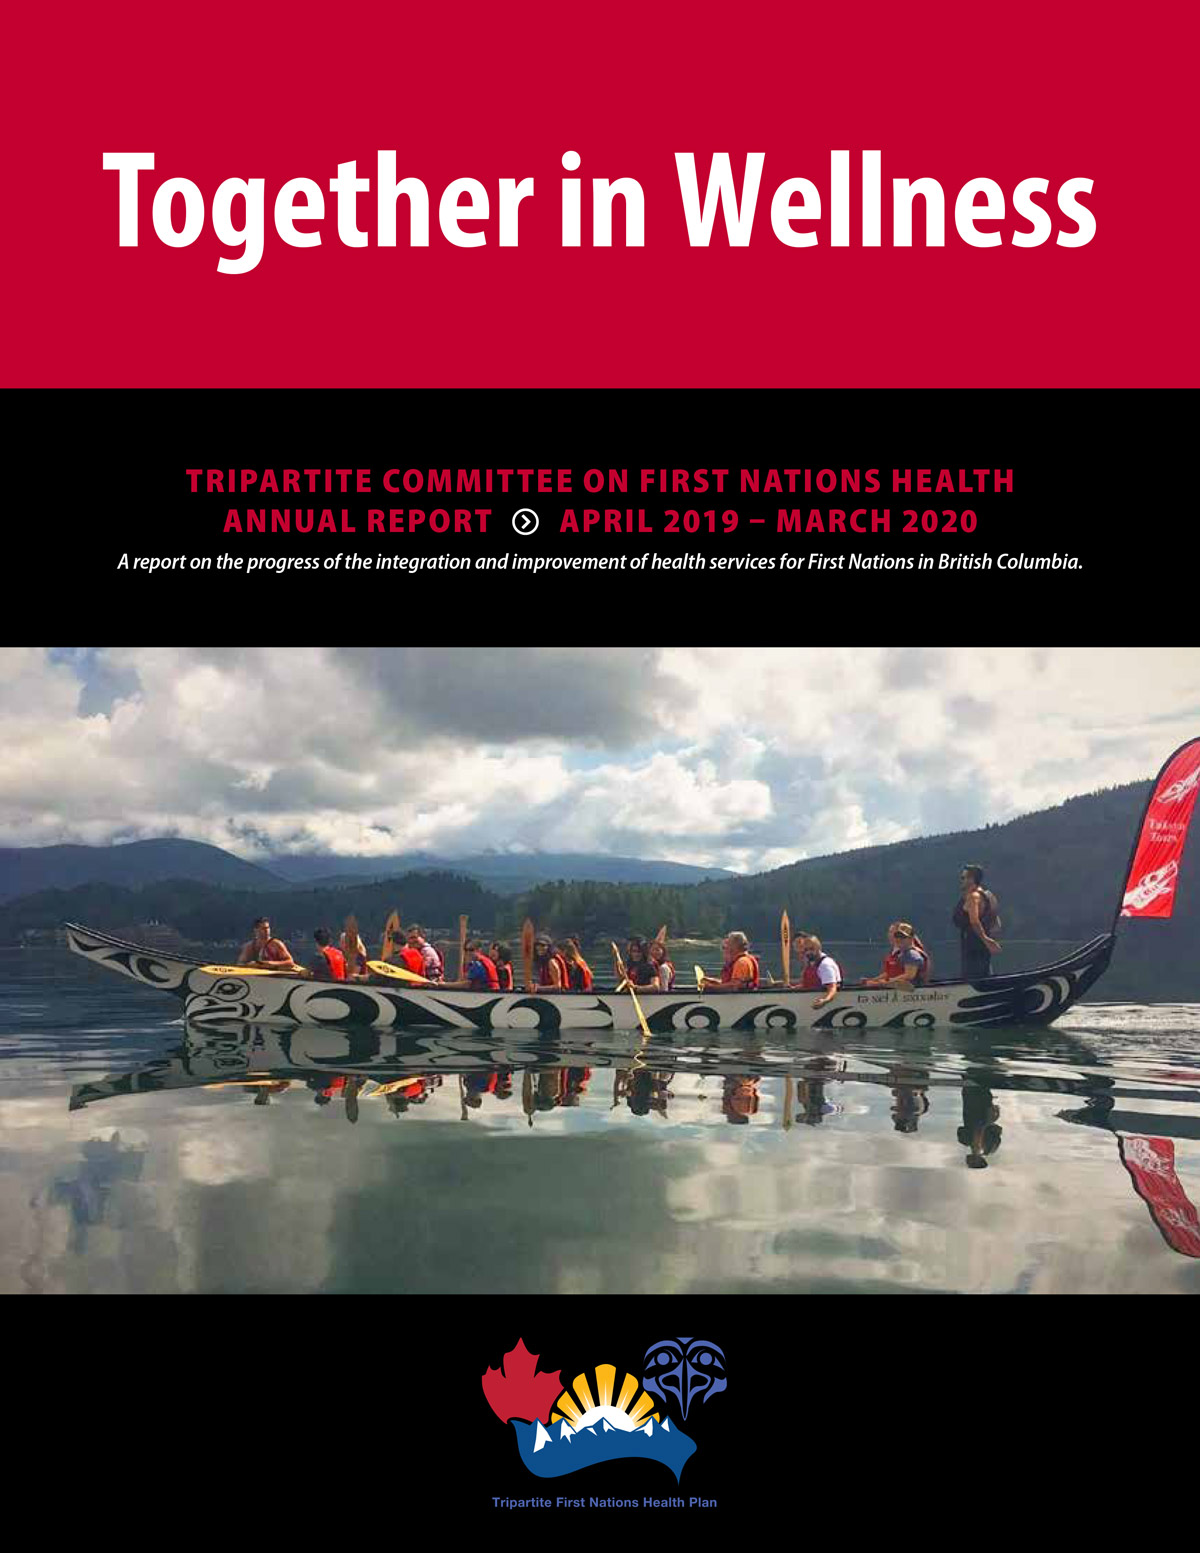 Together-in-Wellness-April-2019-March-2020-Cover.jpg